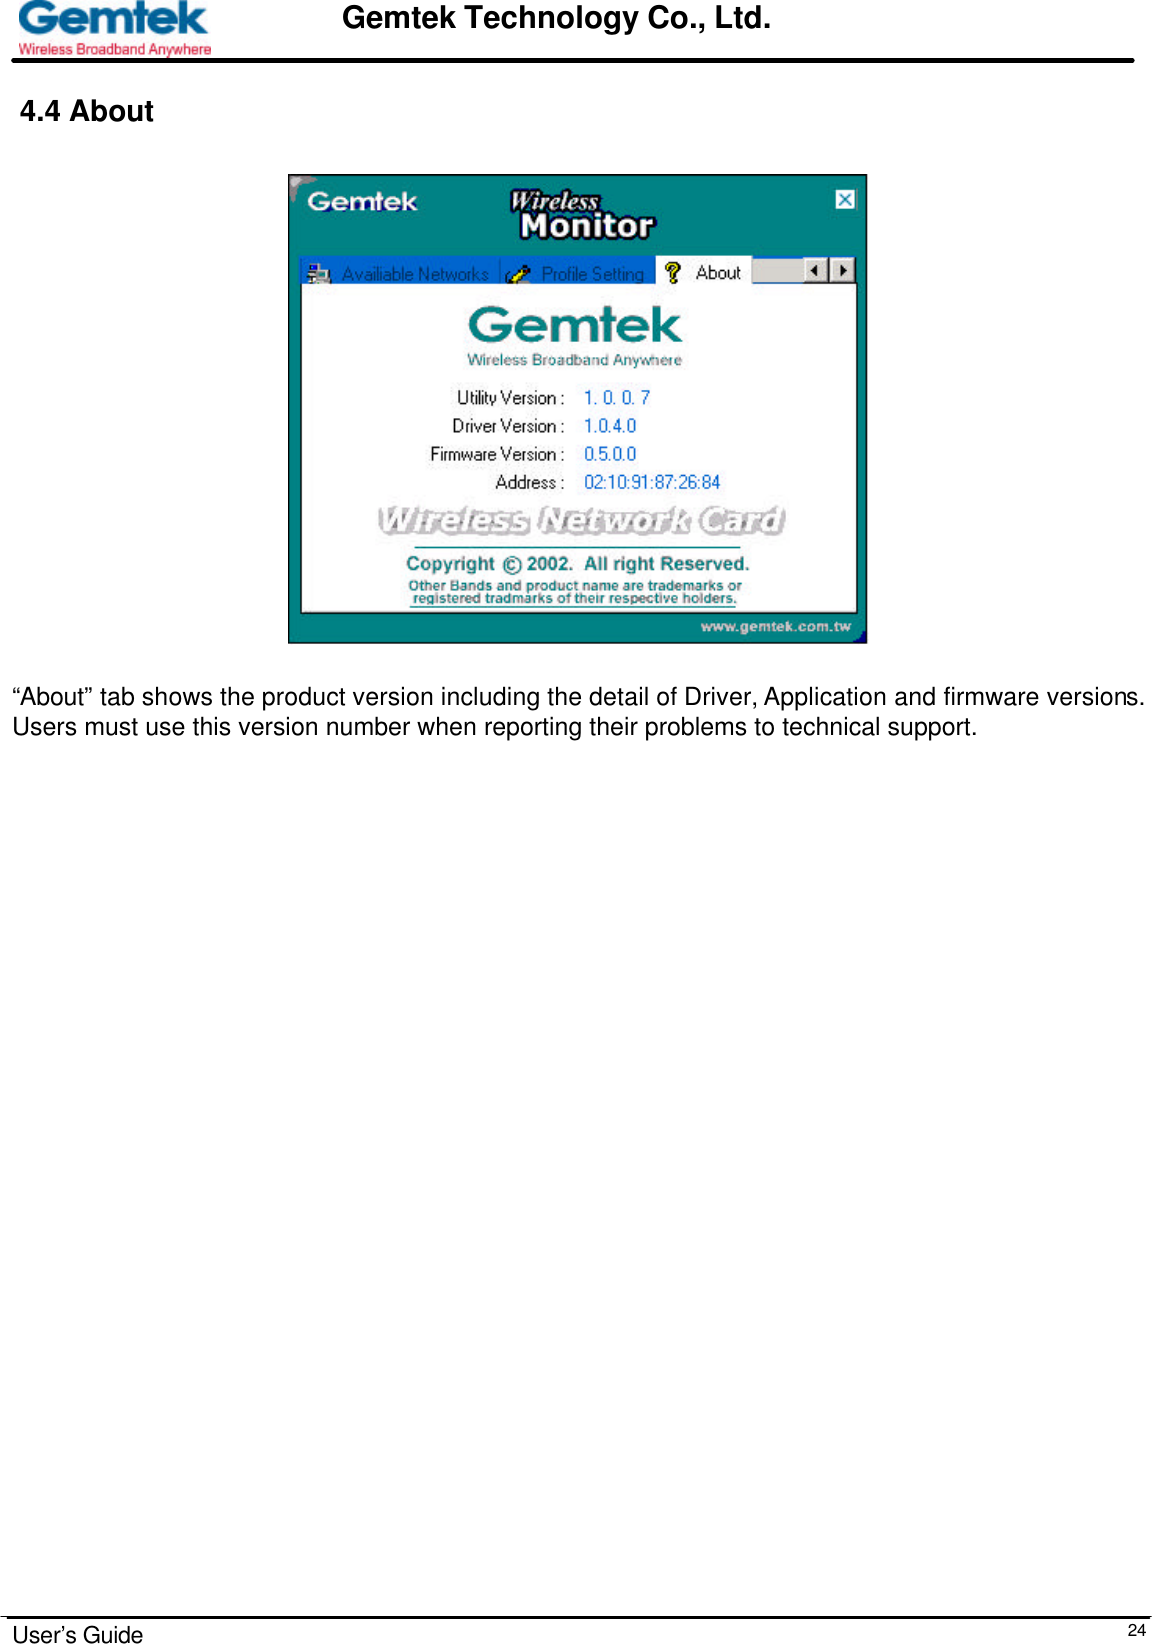                                                                                                                                                                                                                                                                      User’s Guide  24Gemtek Technology Co., Ltd. 4.4 About       “About” tab shows the product version including the detail of Driver, Application and firmware versions. Users must use this version number when reporting their problems to technical support.                    